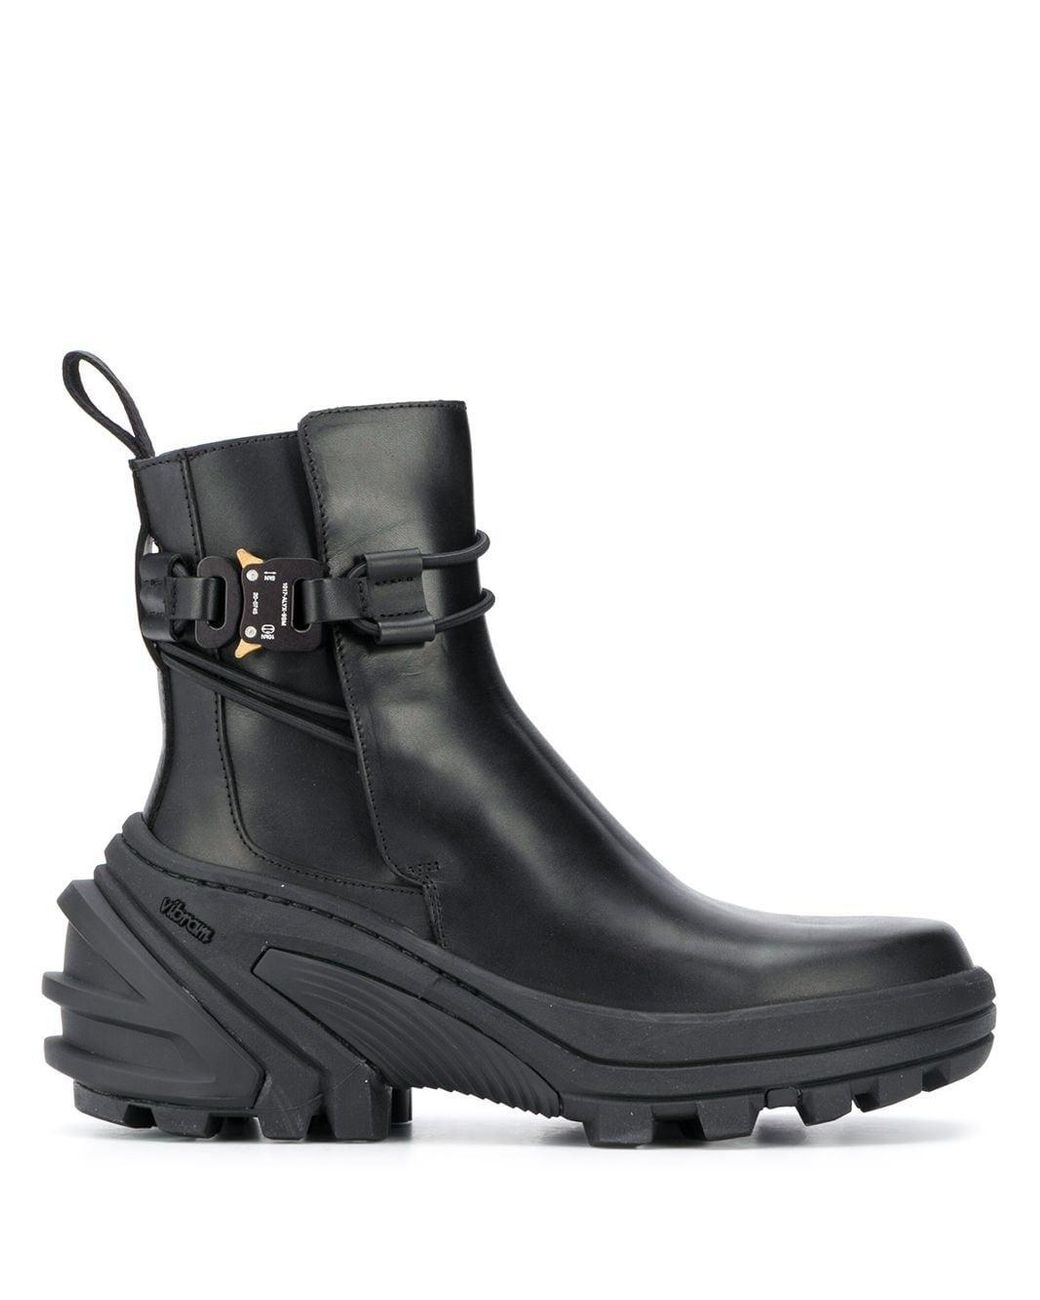 1017 ALYX 9SM Leather Buckled Chelsea Boots in Black - Lyst